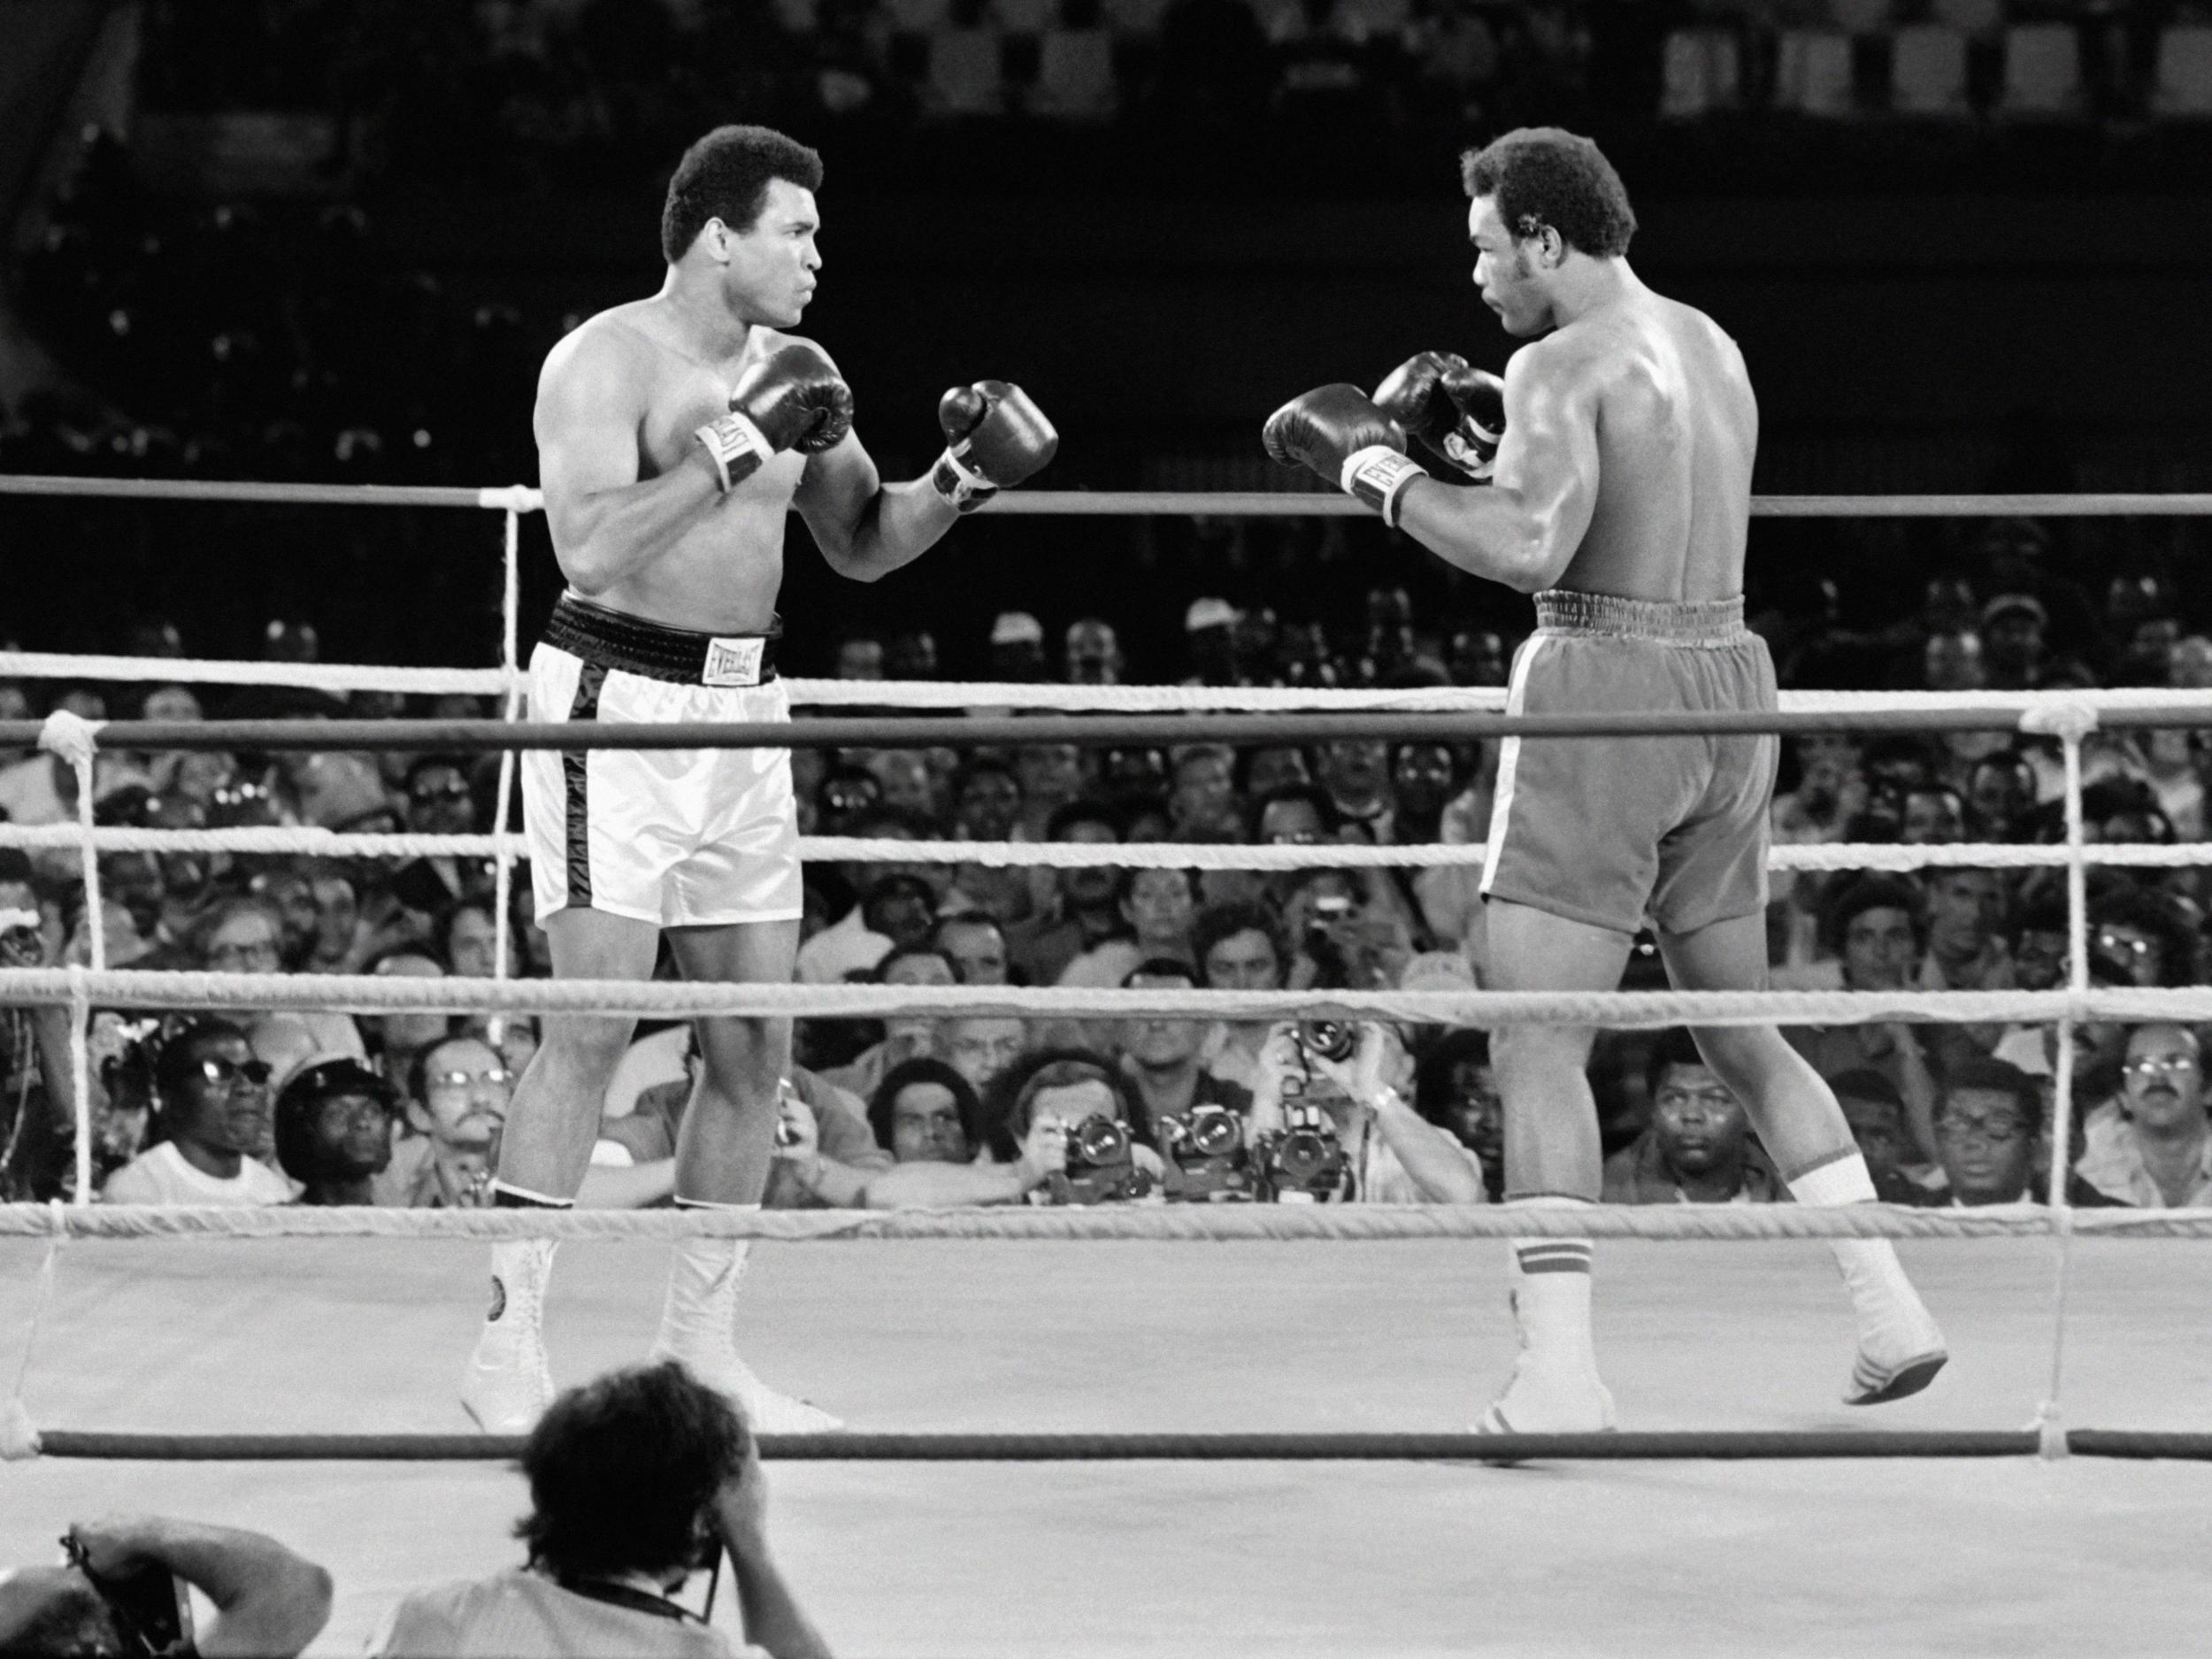 Ali's return led him to Foreman, who in turn made a comeback during his career